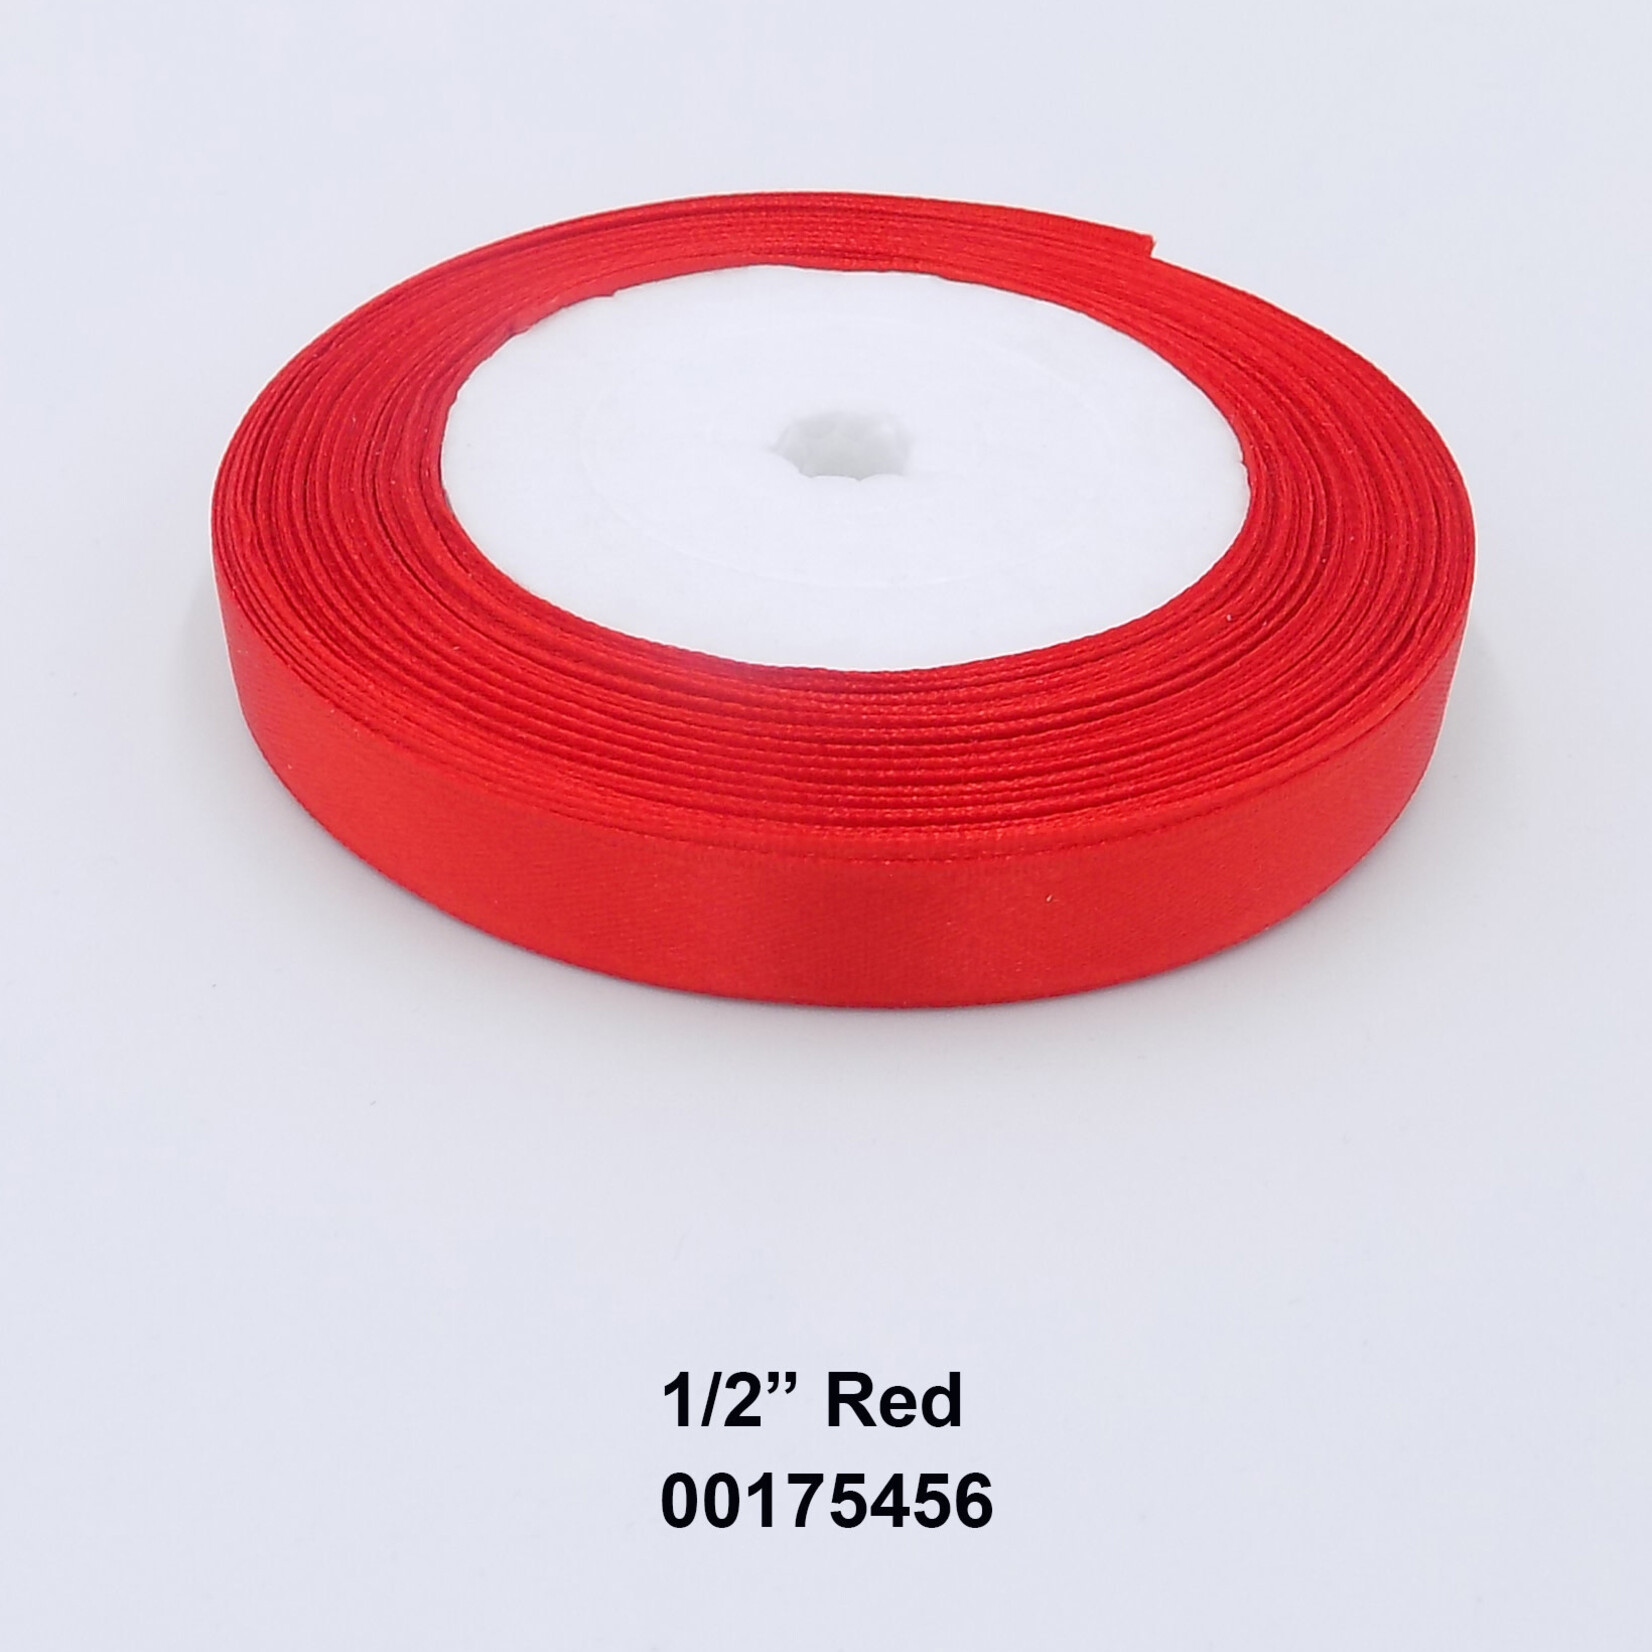 RED Satin Ribbon 1 inch (Aprox. 10 Meters) Set of 2 Rolls